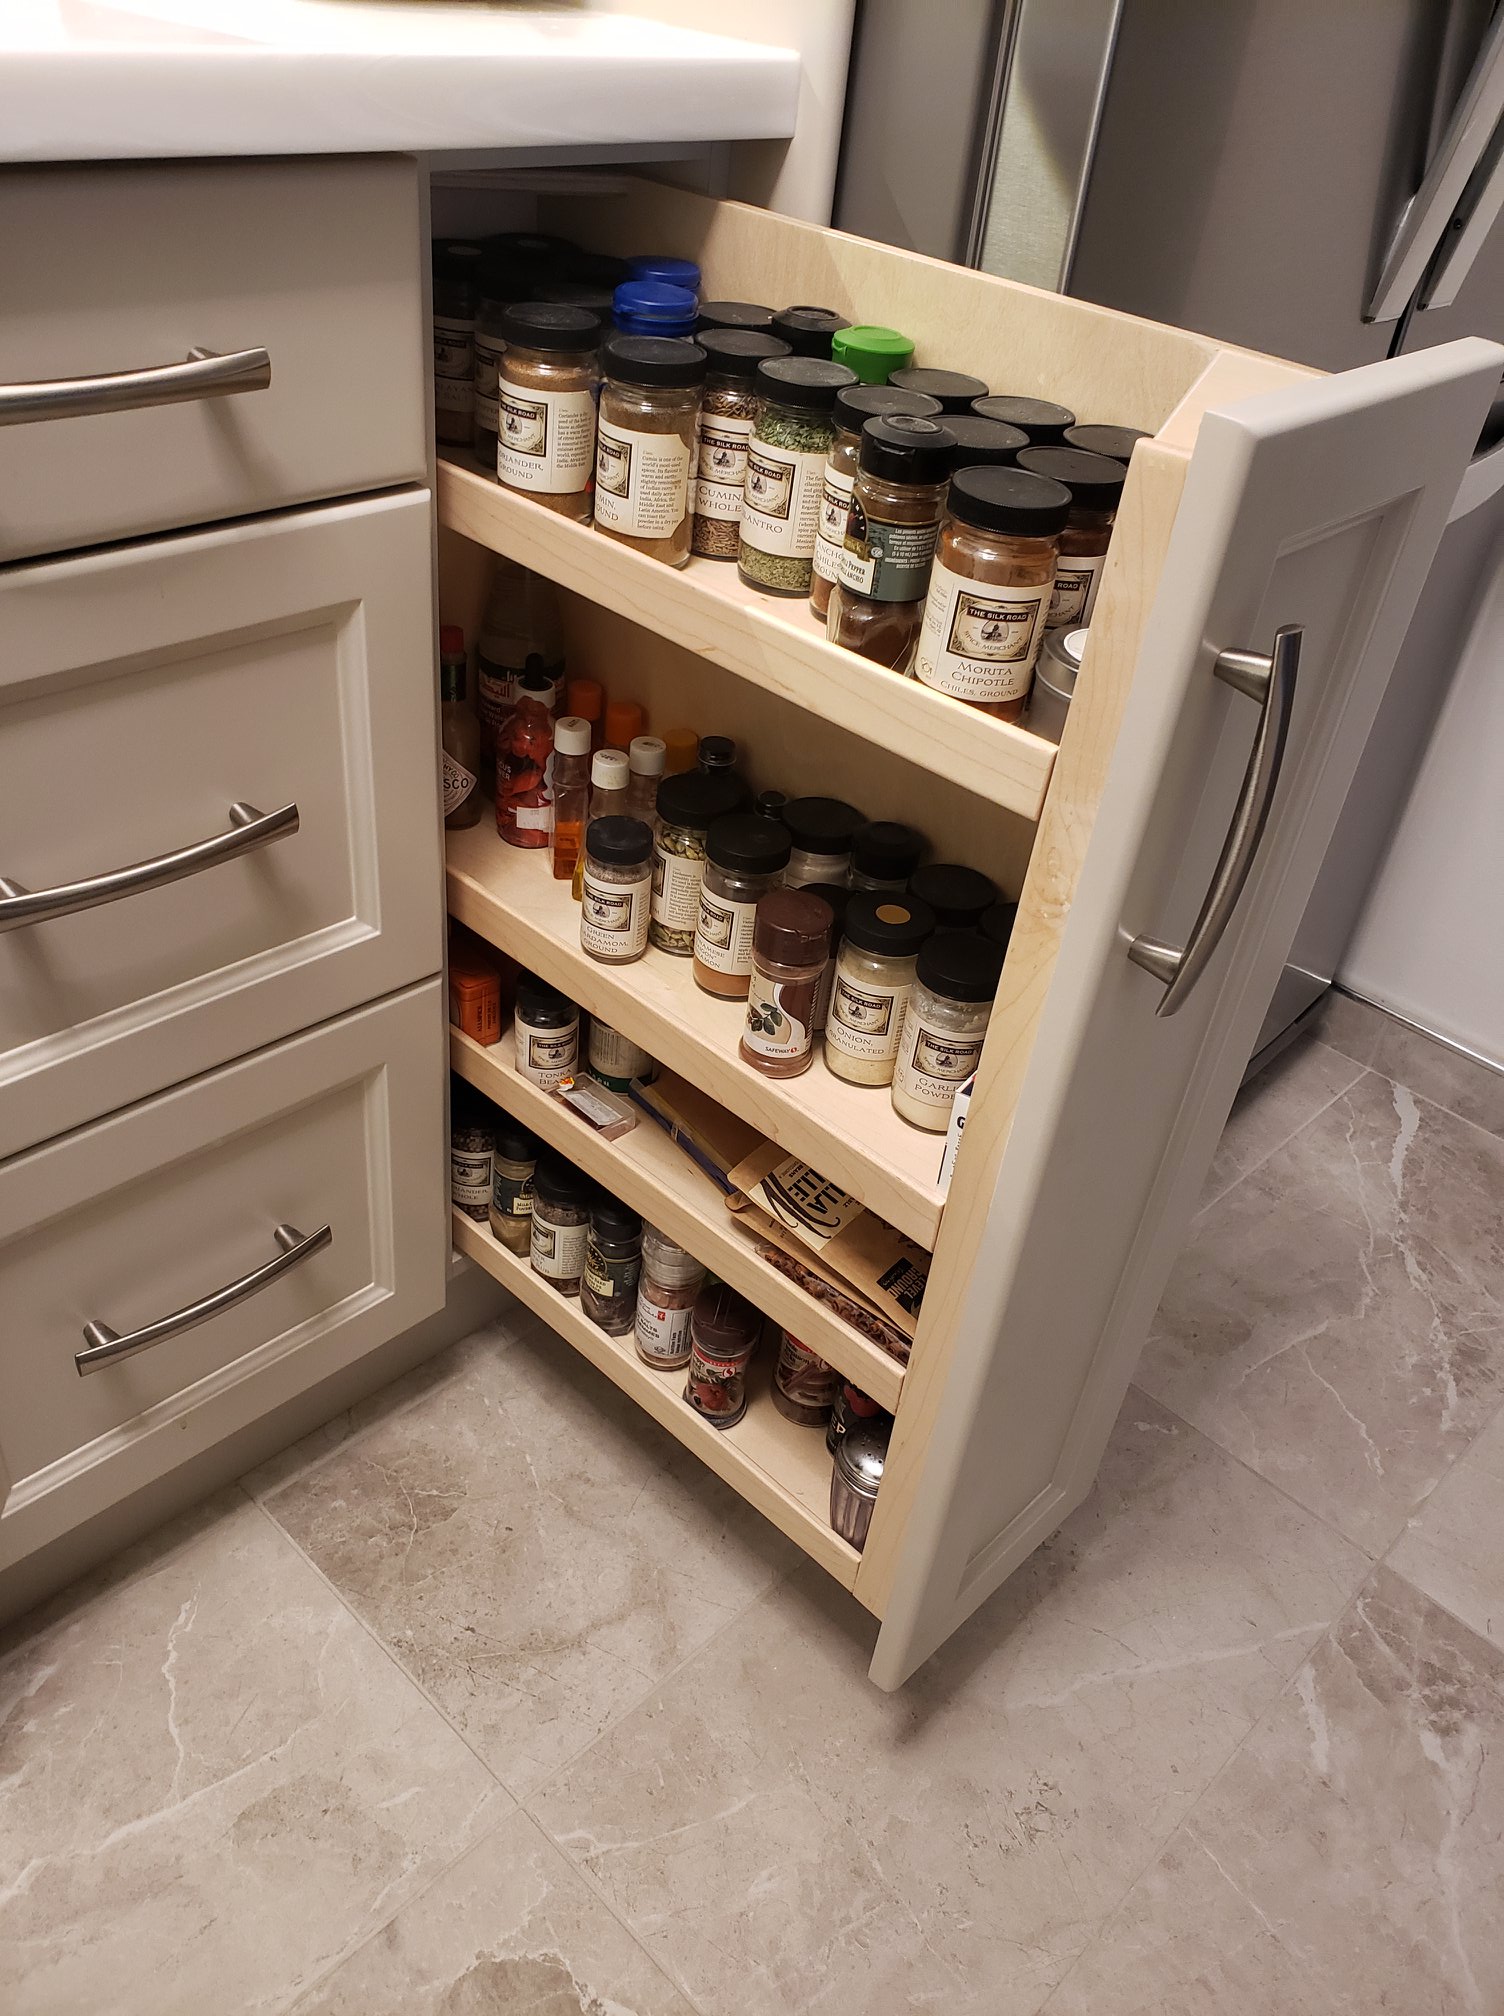 Here is the pull out spice rack all loaded up with my client's spices for cooking.